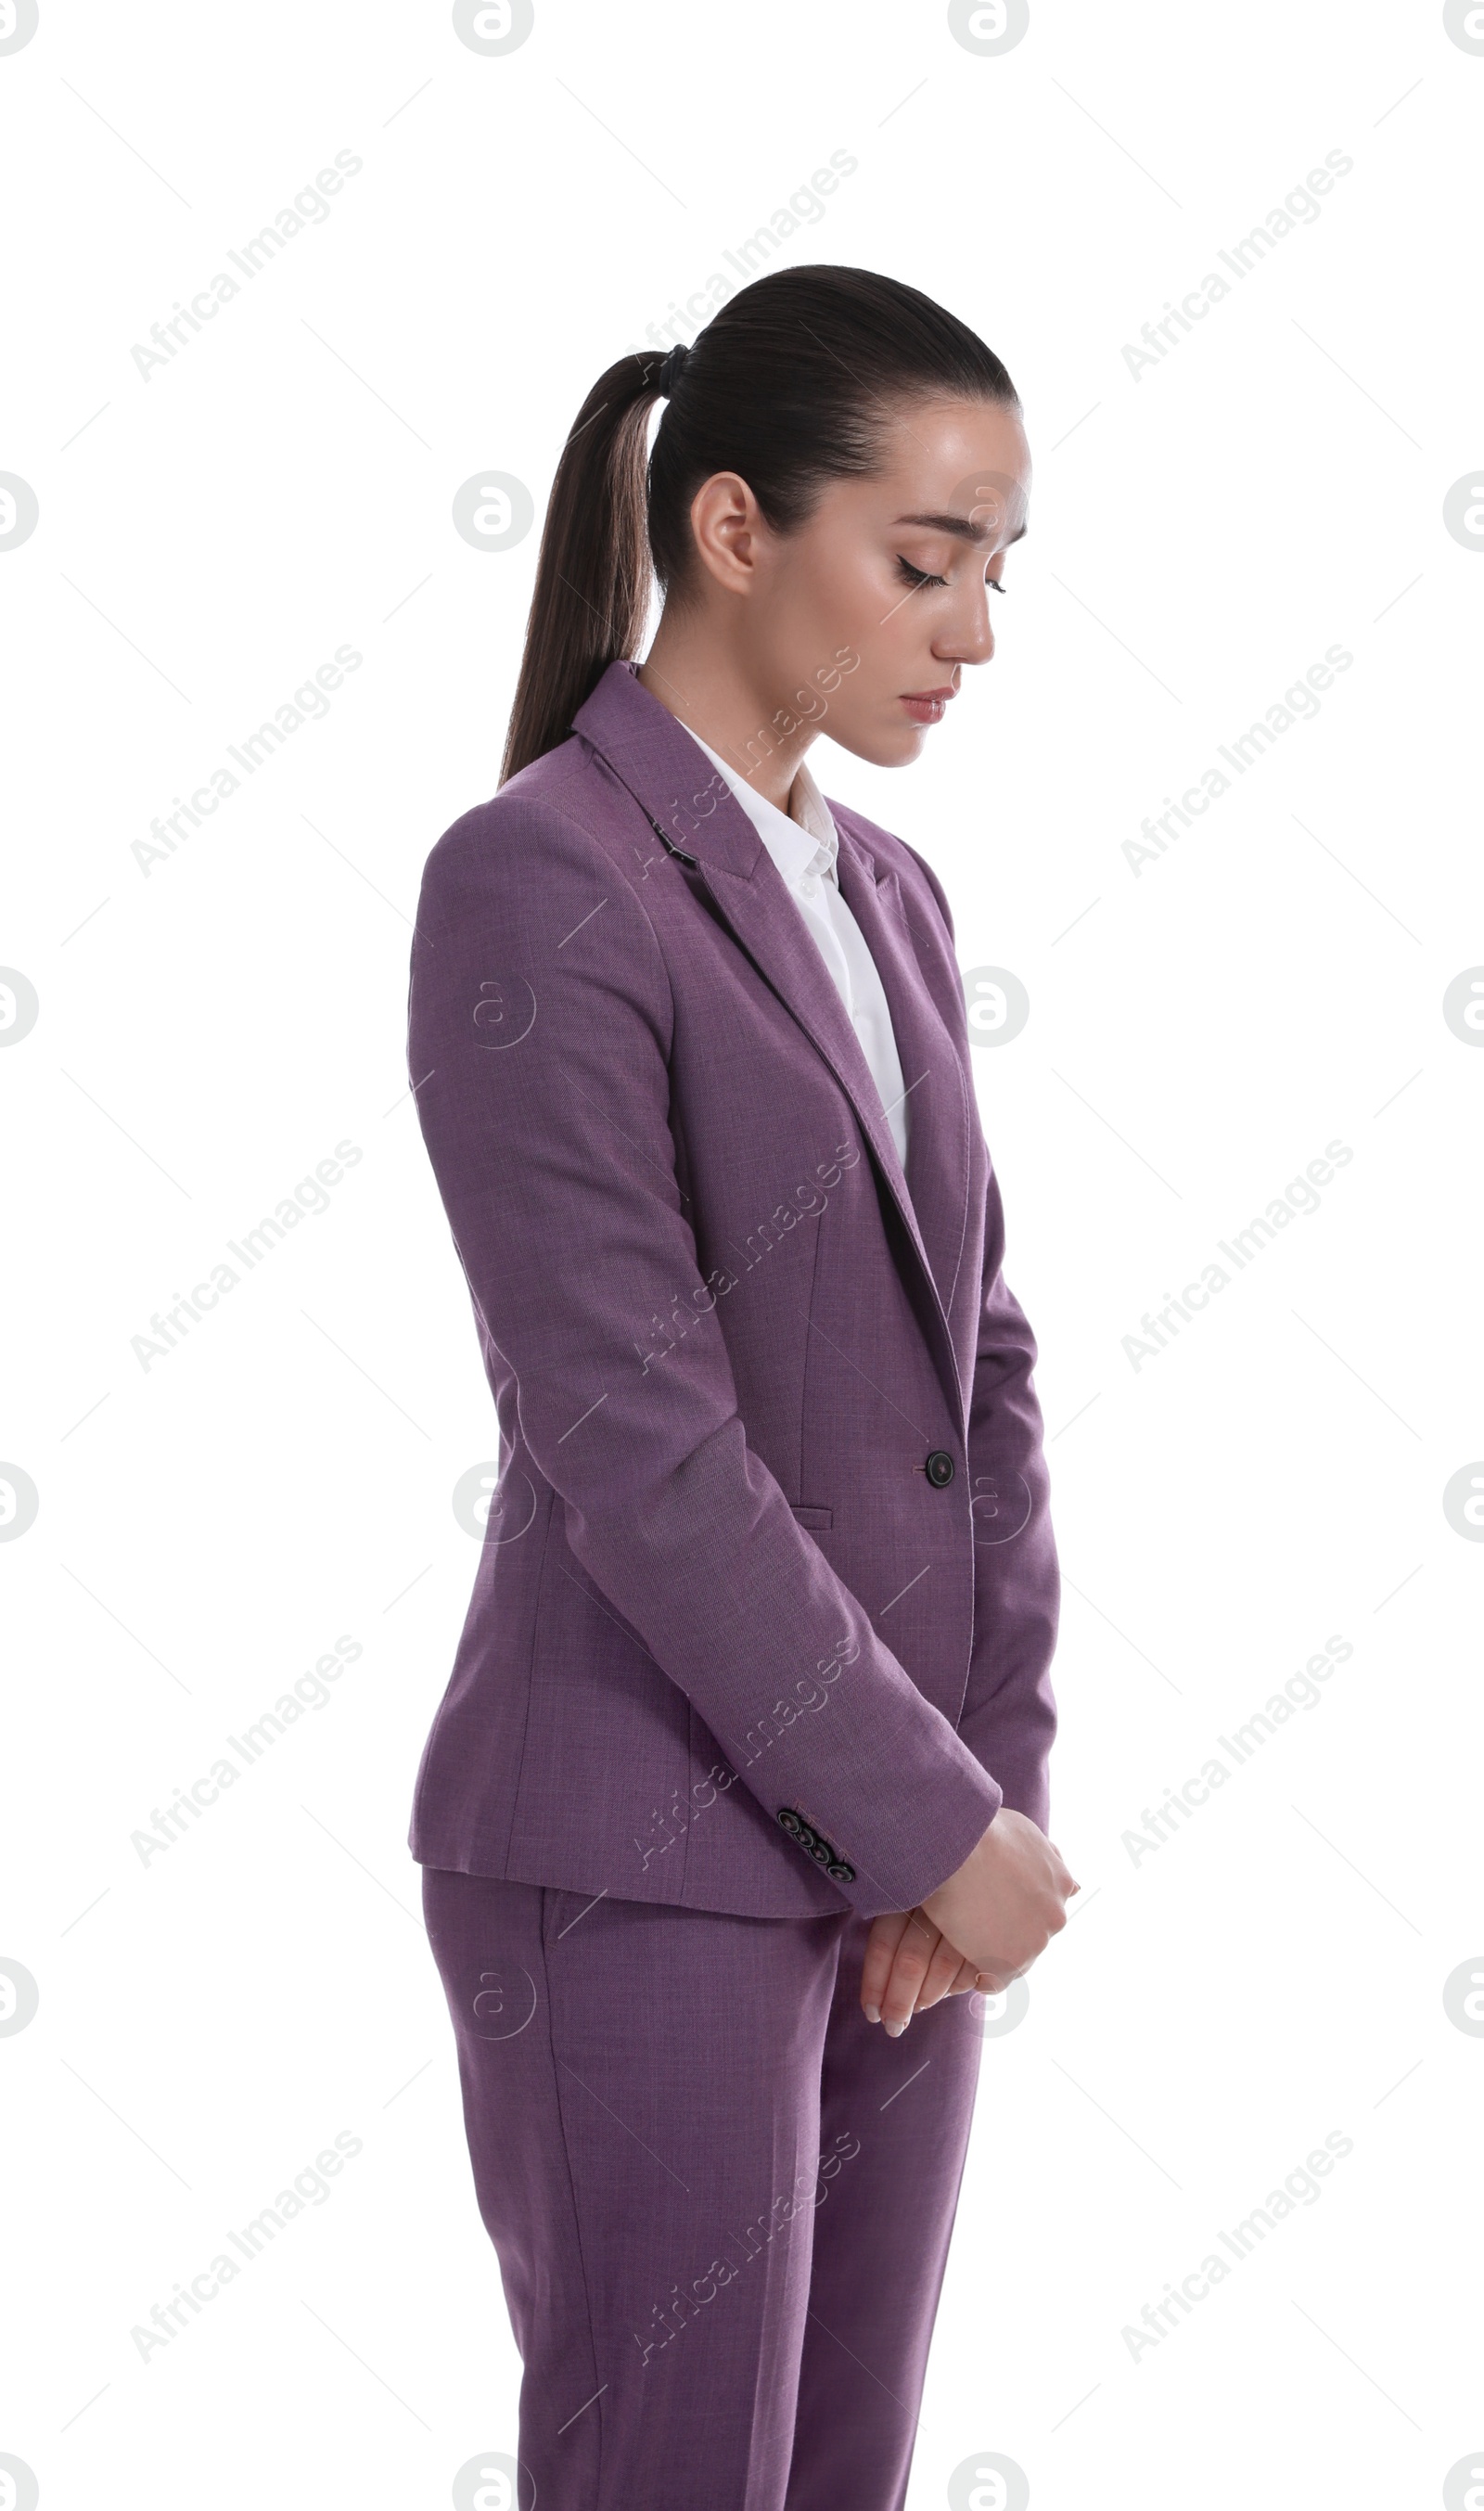 Photo of Upset woman in suit on white background